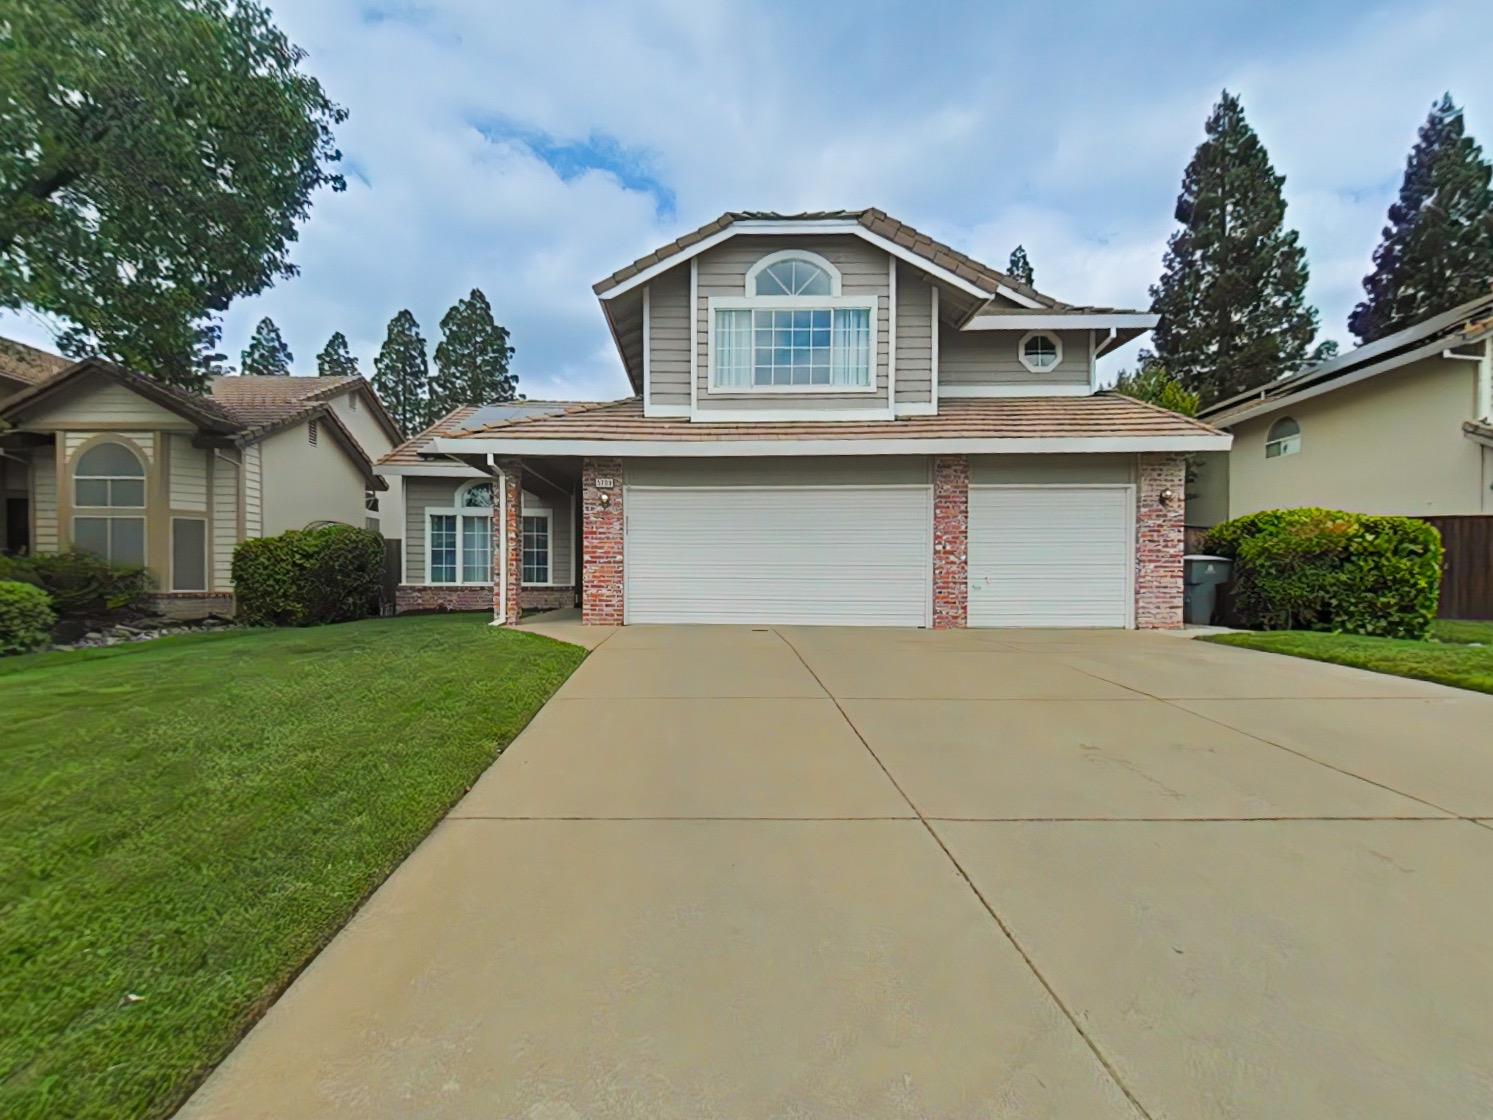 Photo of 5709 Windsong Ct in Rocklin, CA